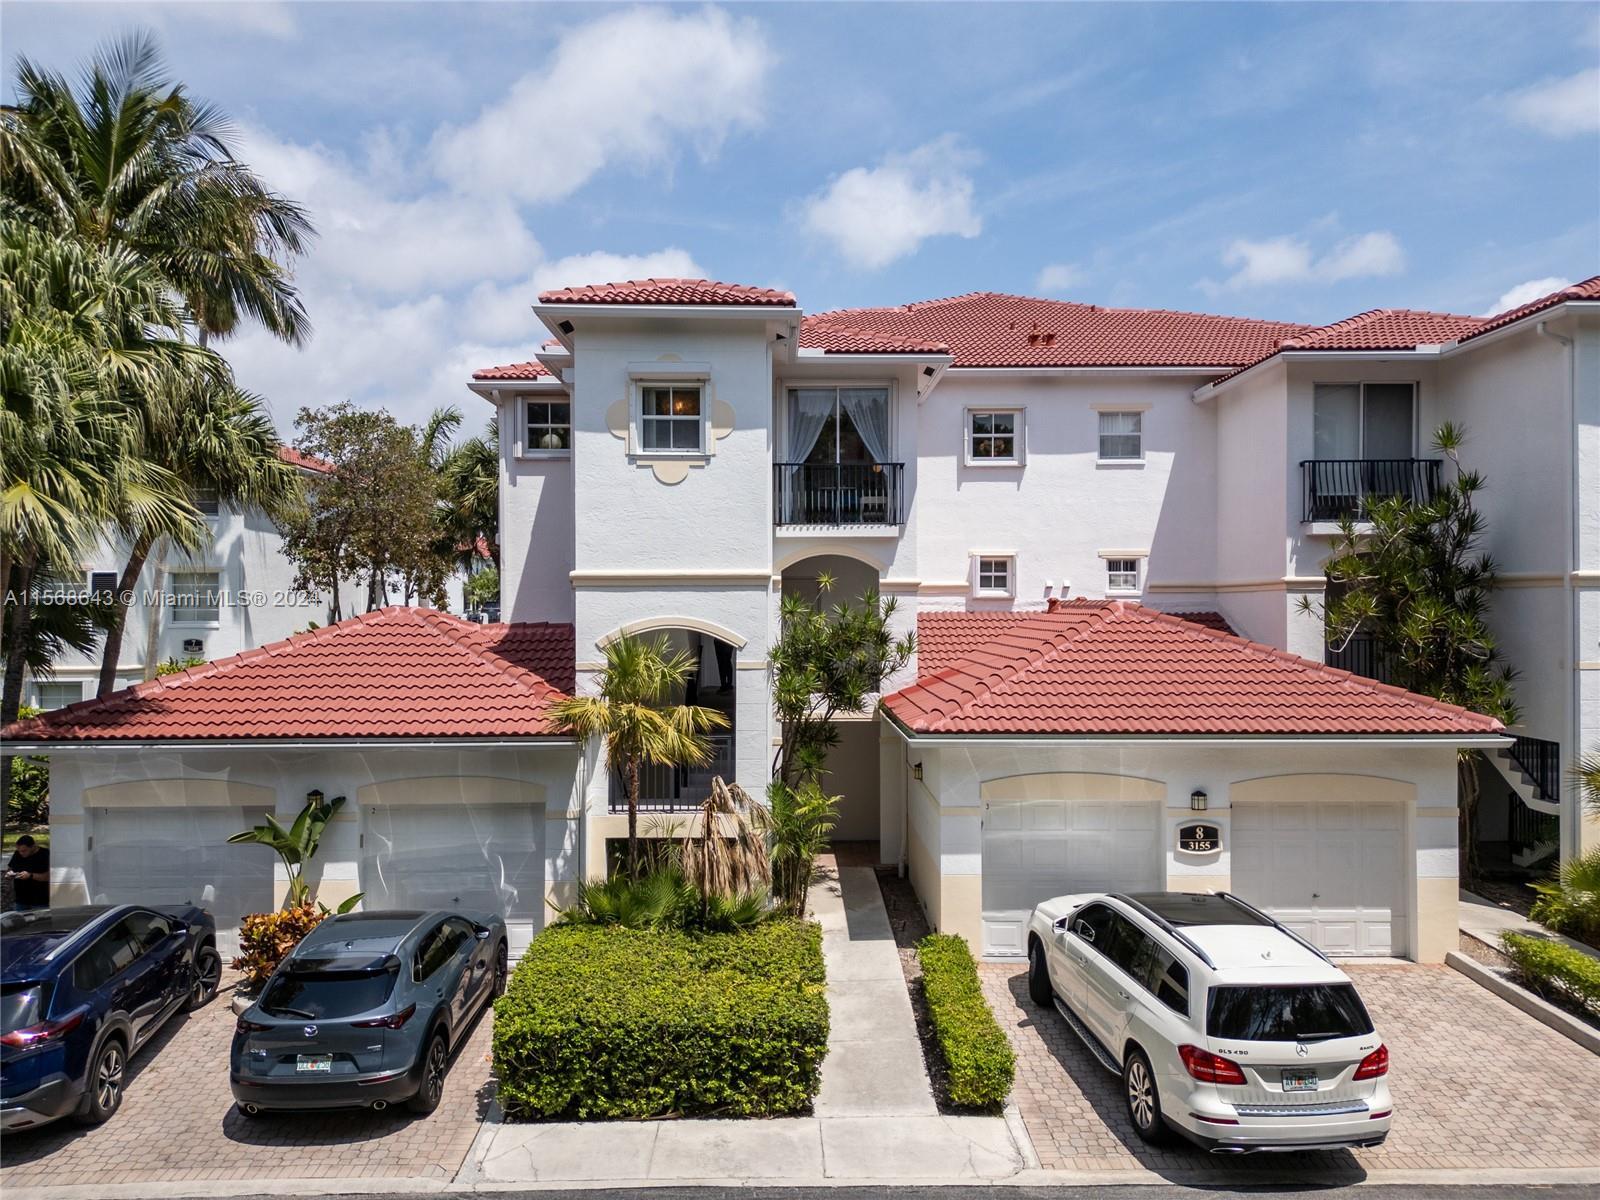 Welcome to your fully remodeled 1/1 sanctuary nestled in one of Aventura's prestigious gated communi